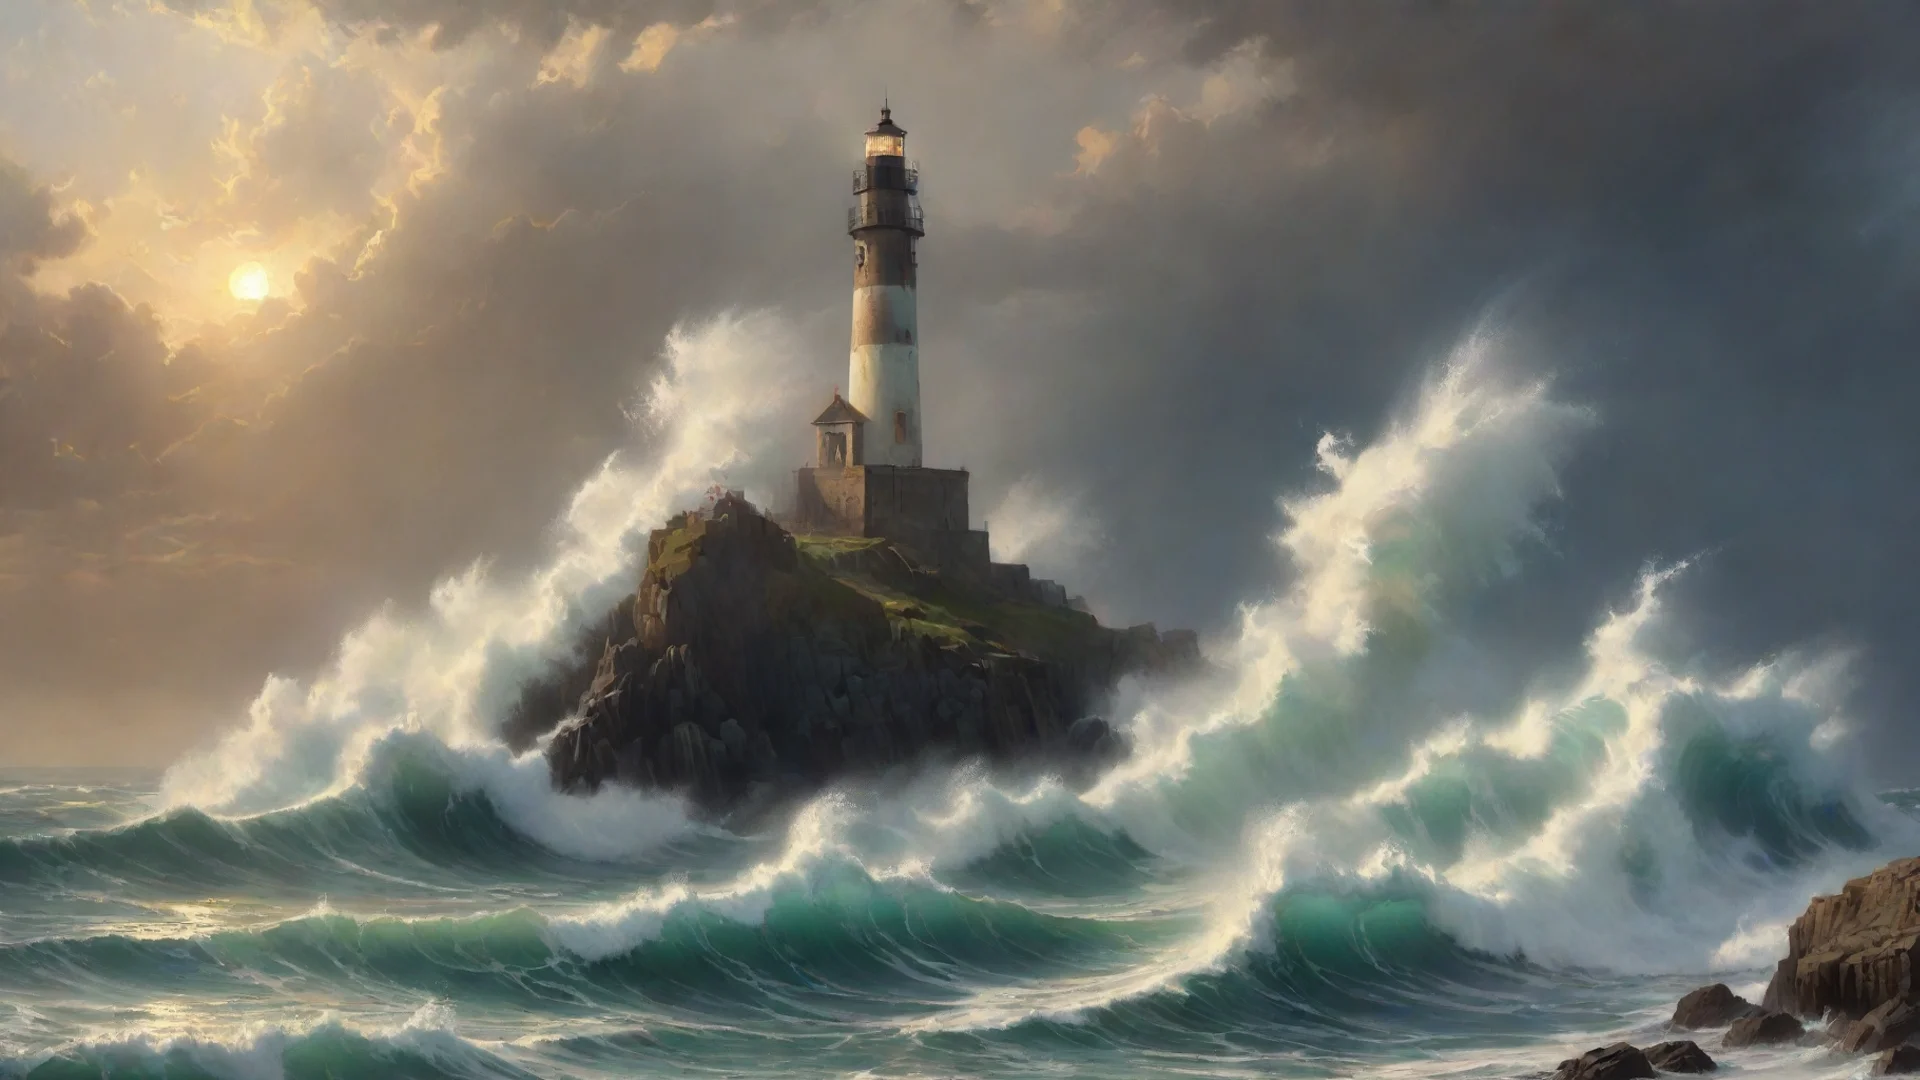 amazing painting of waves crashing against tallrocks  lighthouse  dramatic lighting trending on artstation craig mullins magical atmosphere by renato muccillo a amazing awesome portrait 2 wide